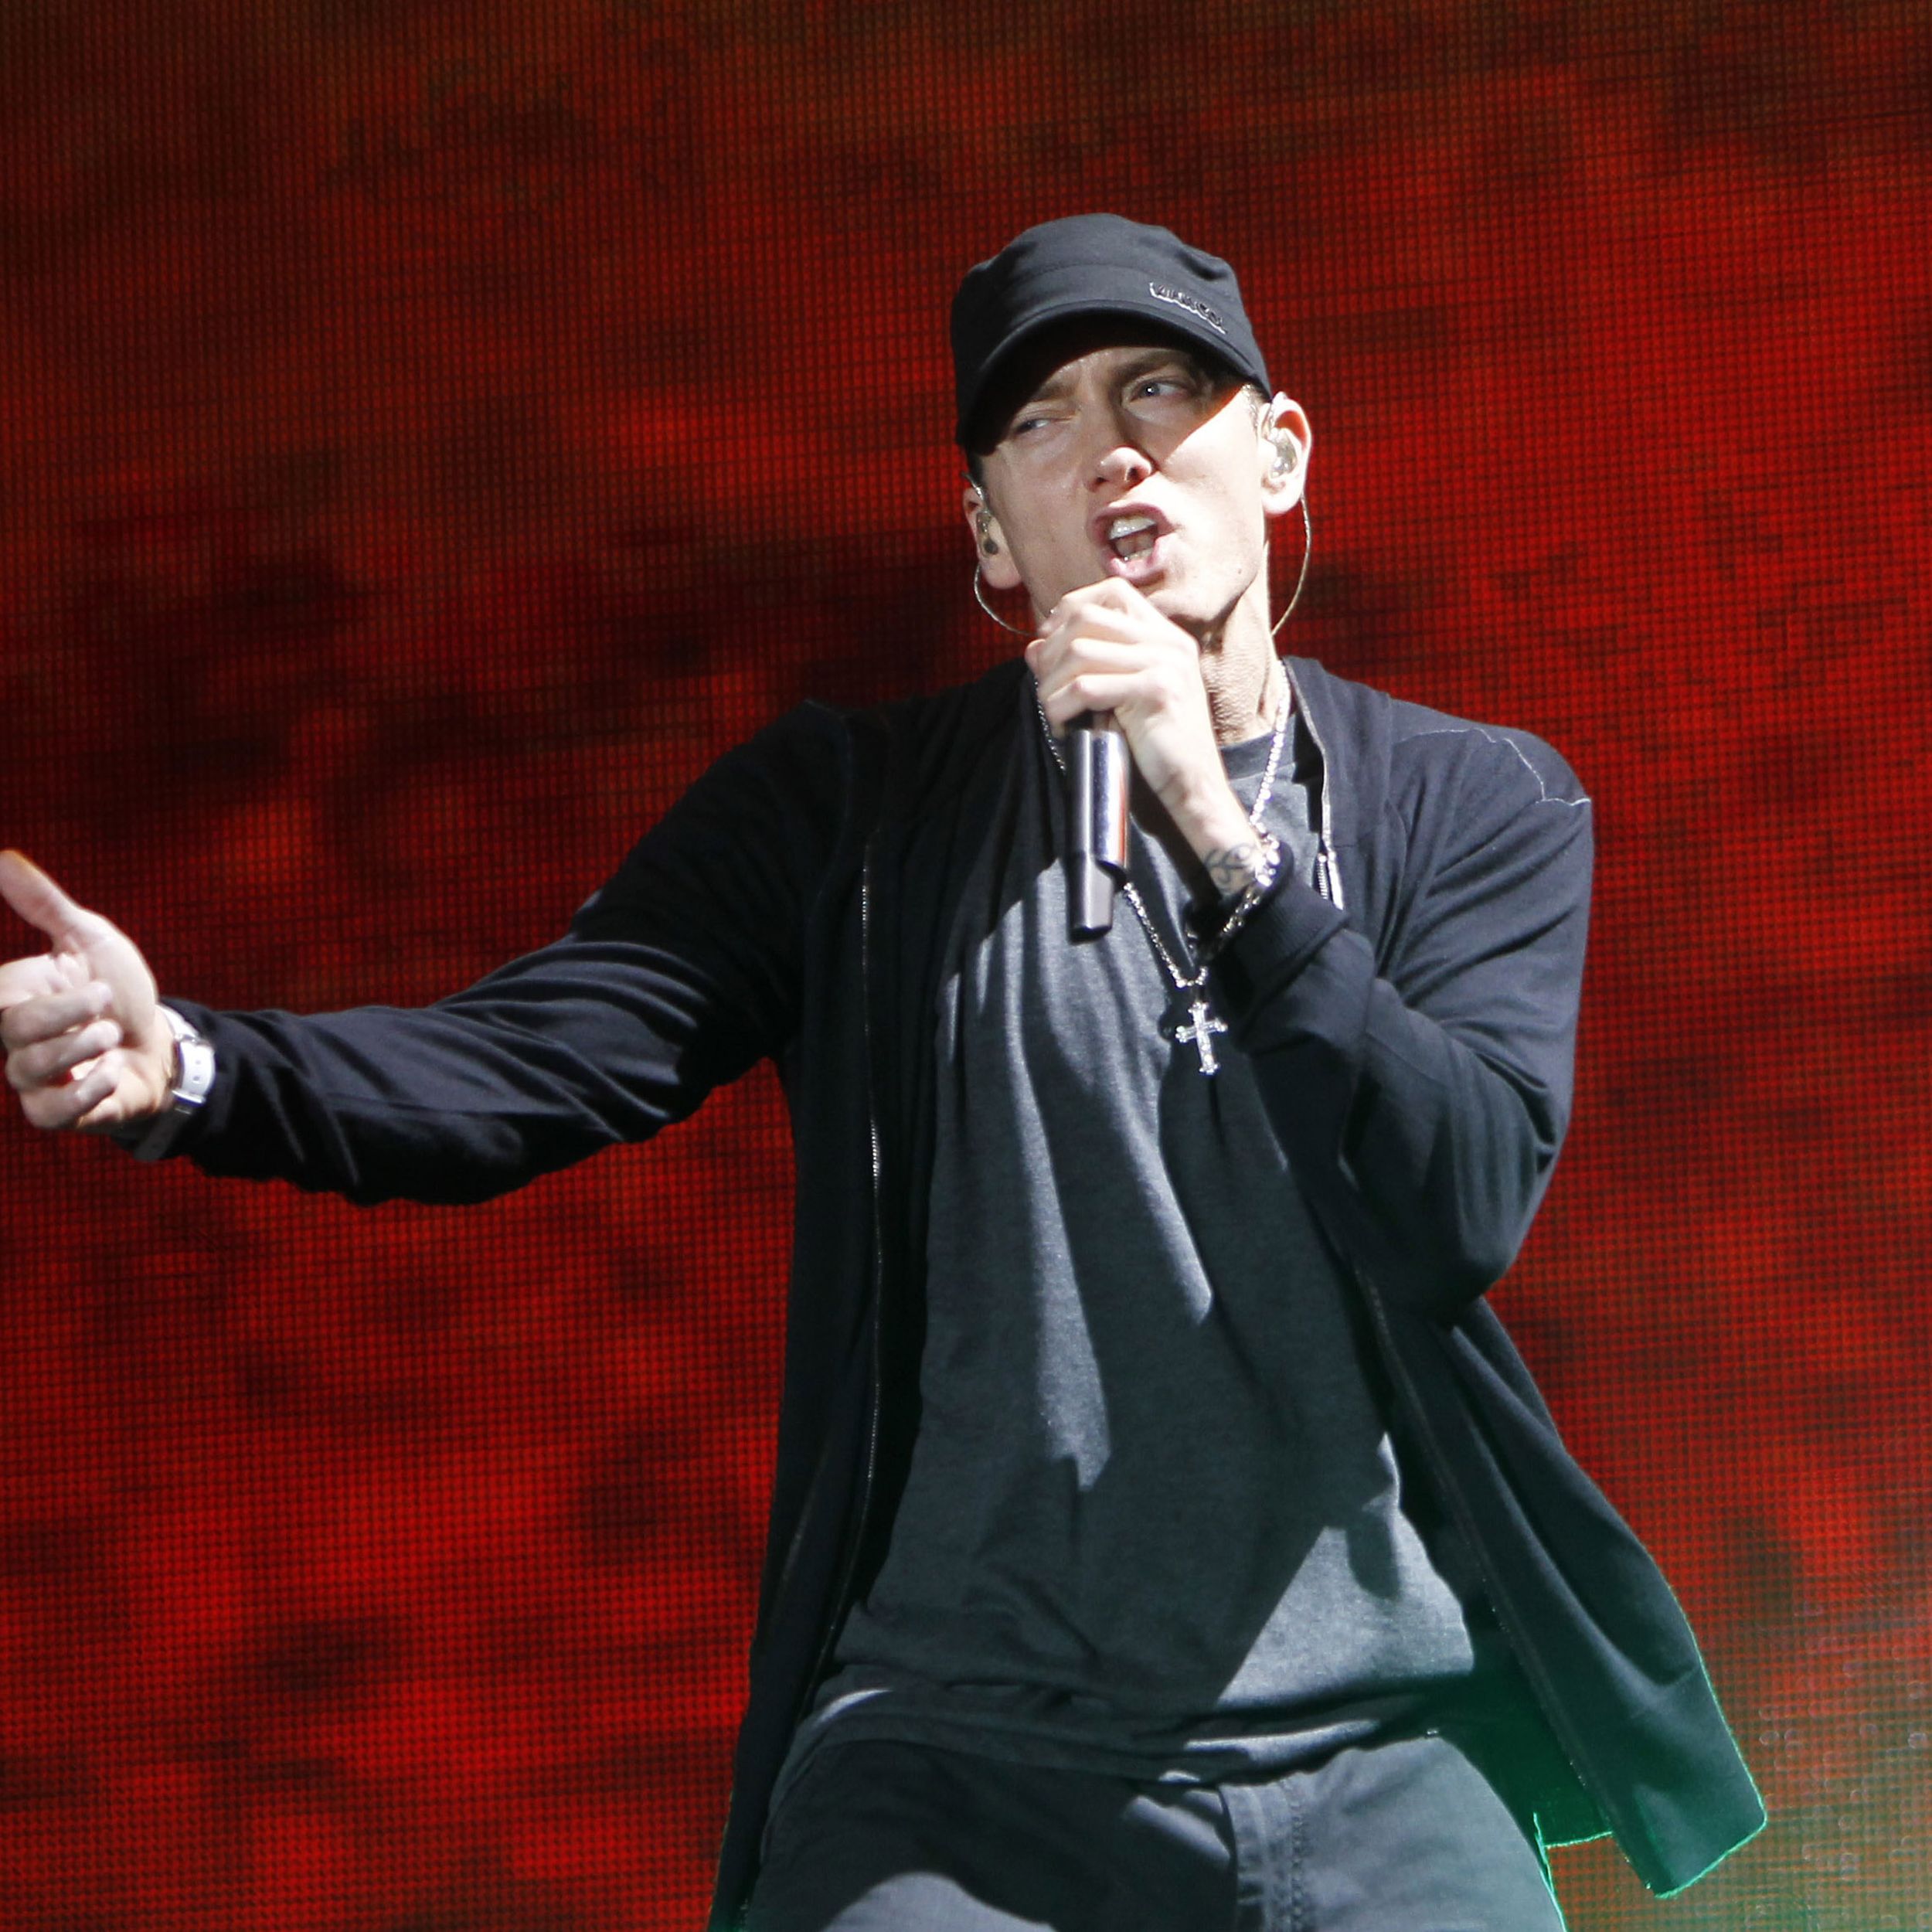 Eminem comes full circle with 'Recovery' success